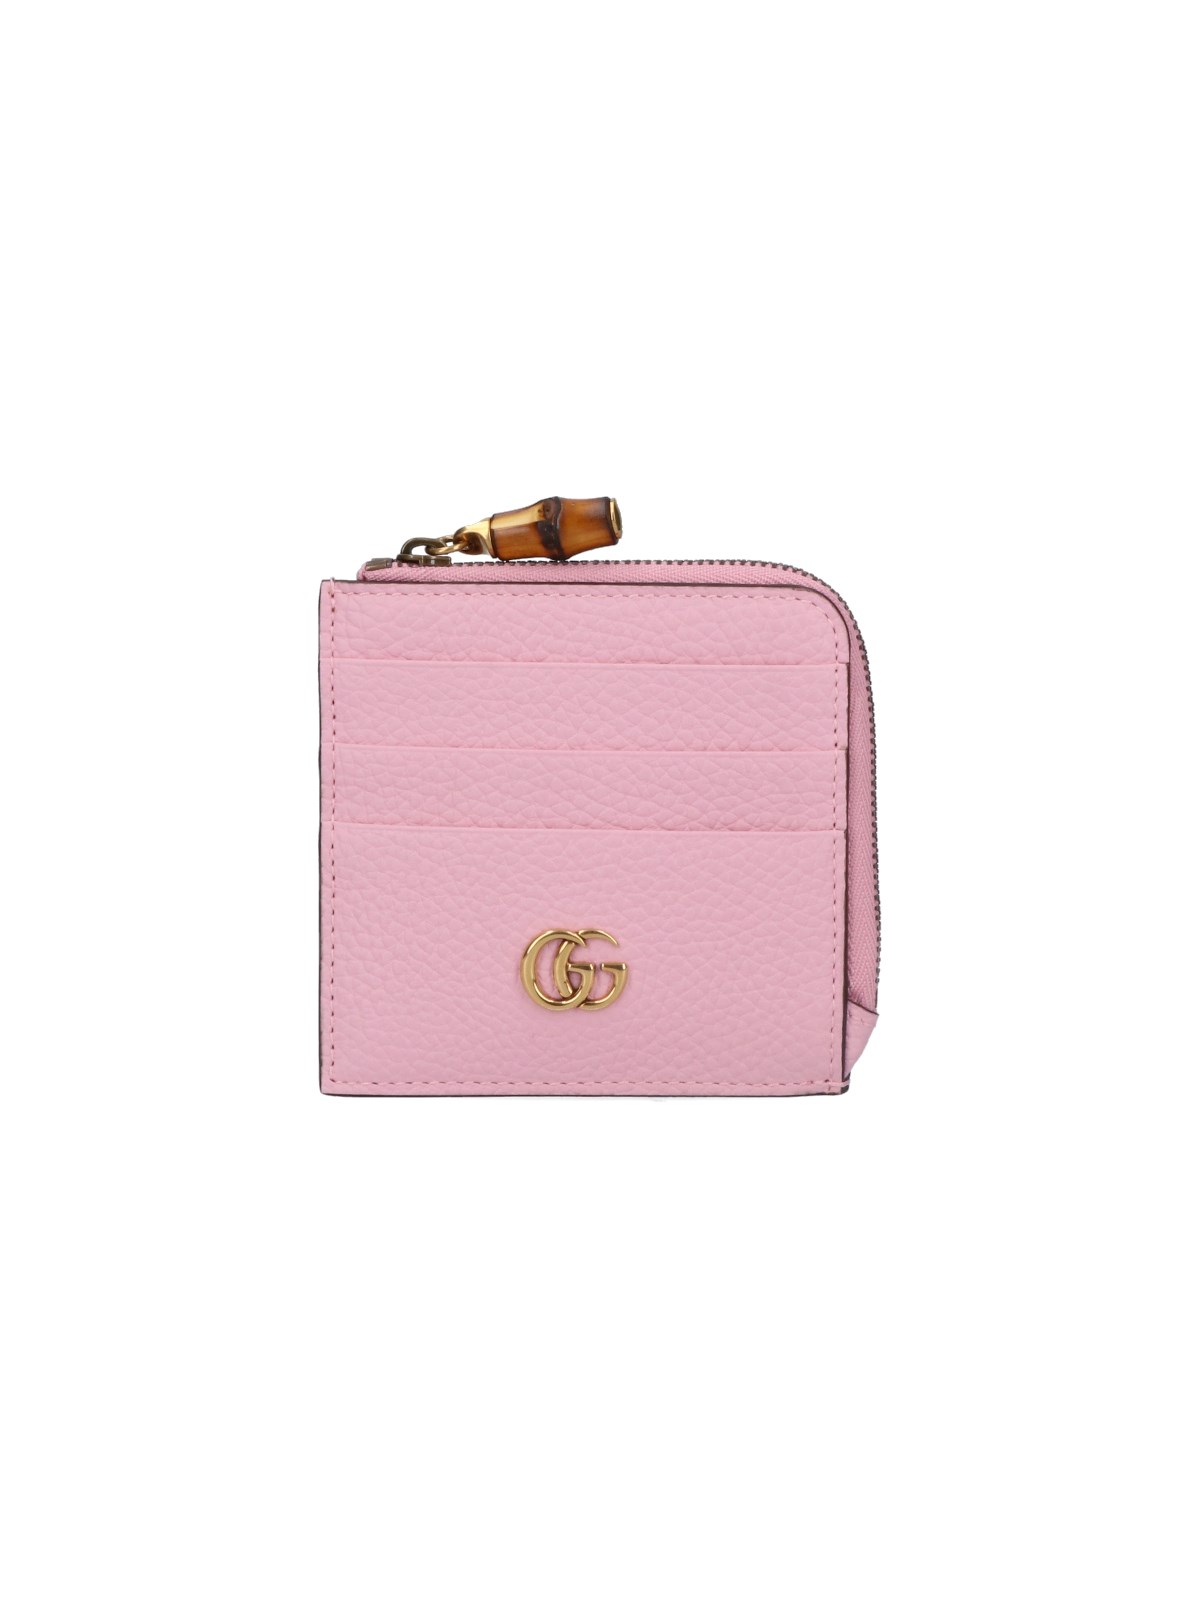 Gucci `bamboo Puller` Card Case In Pink